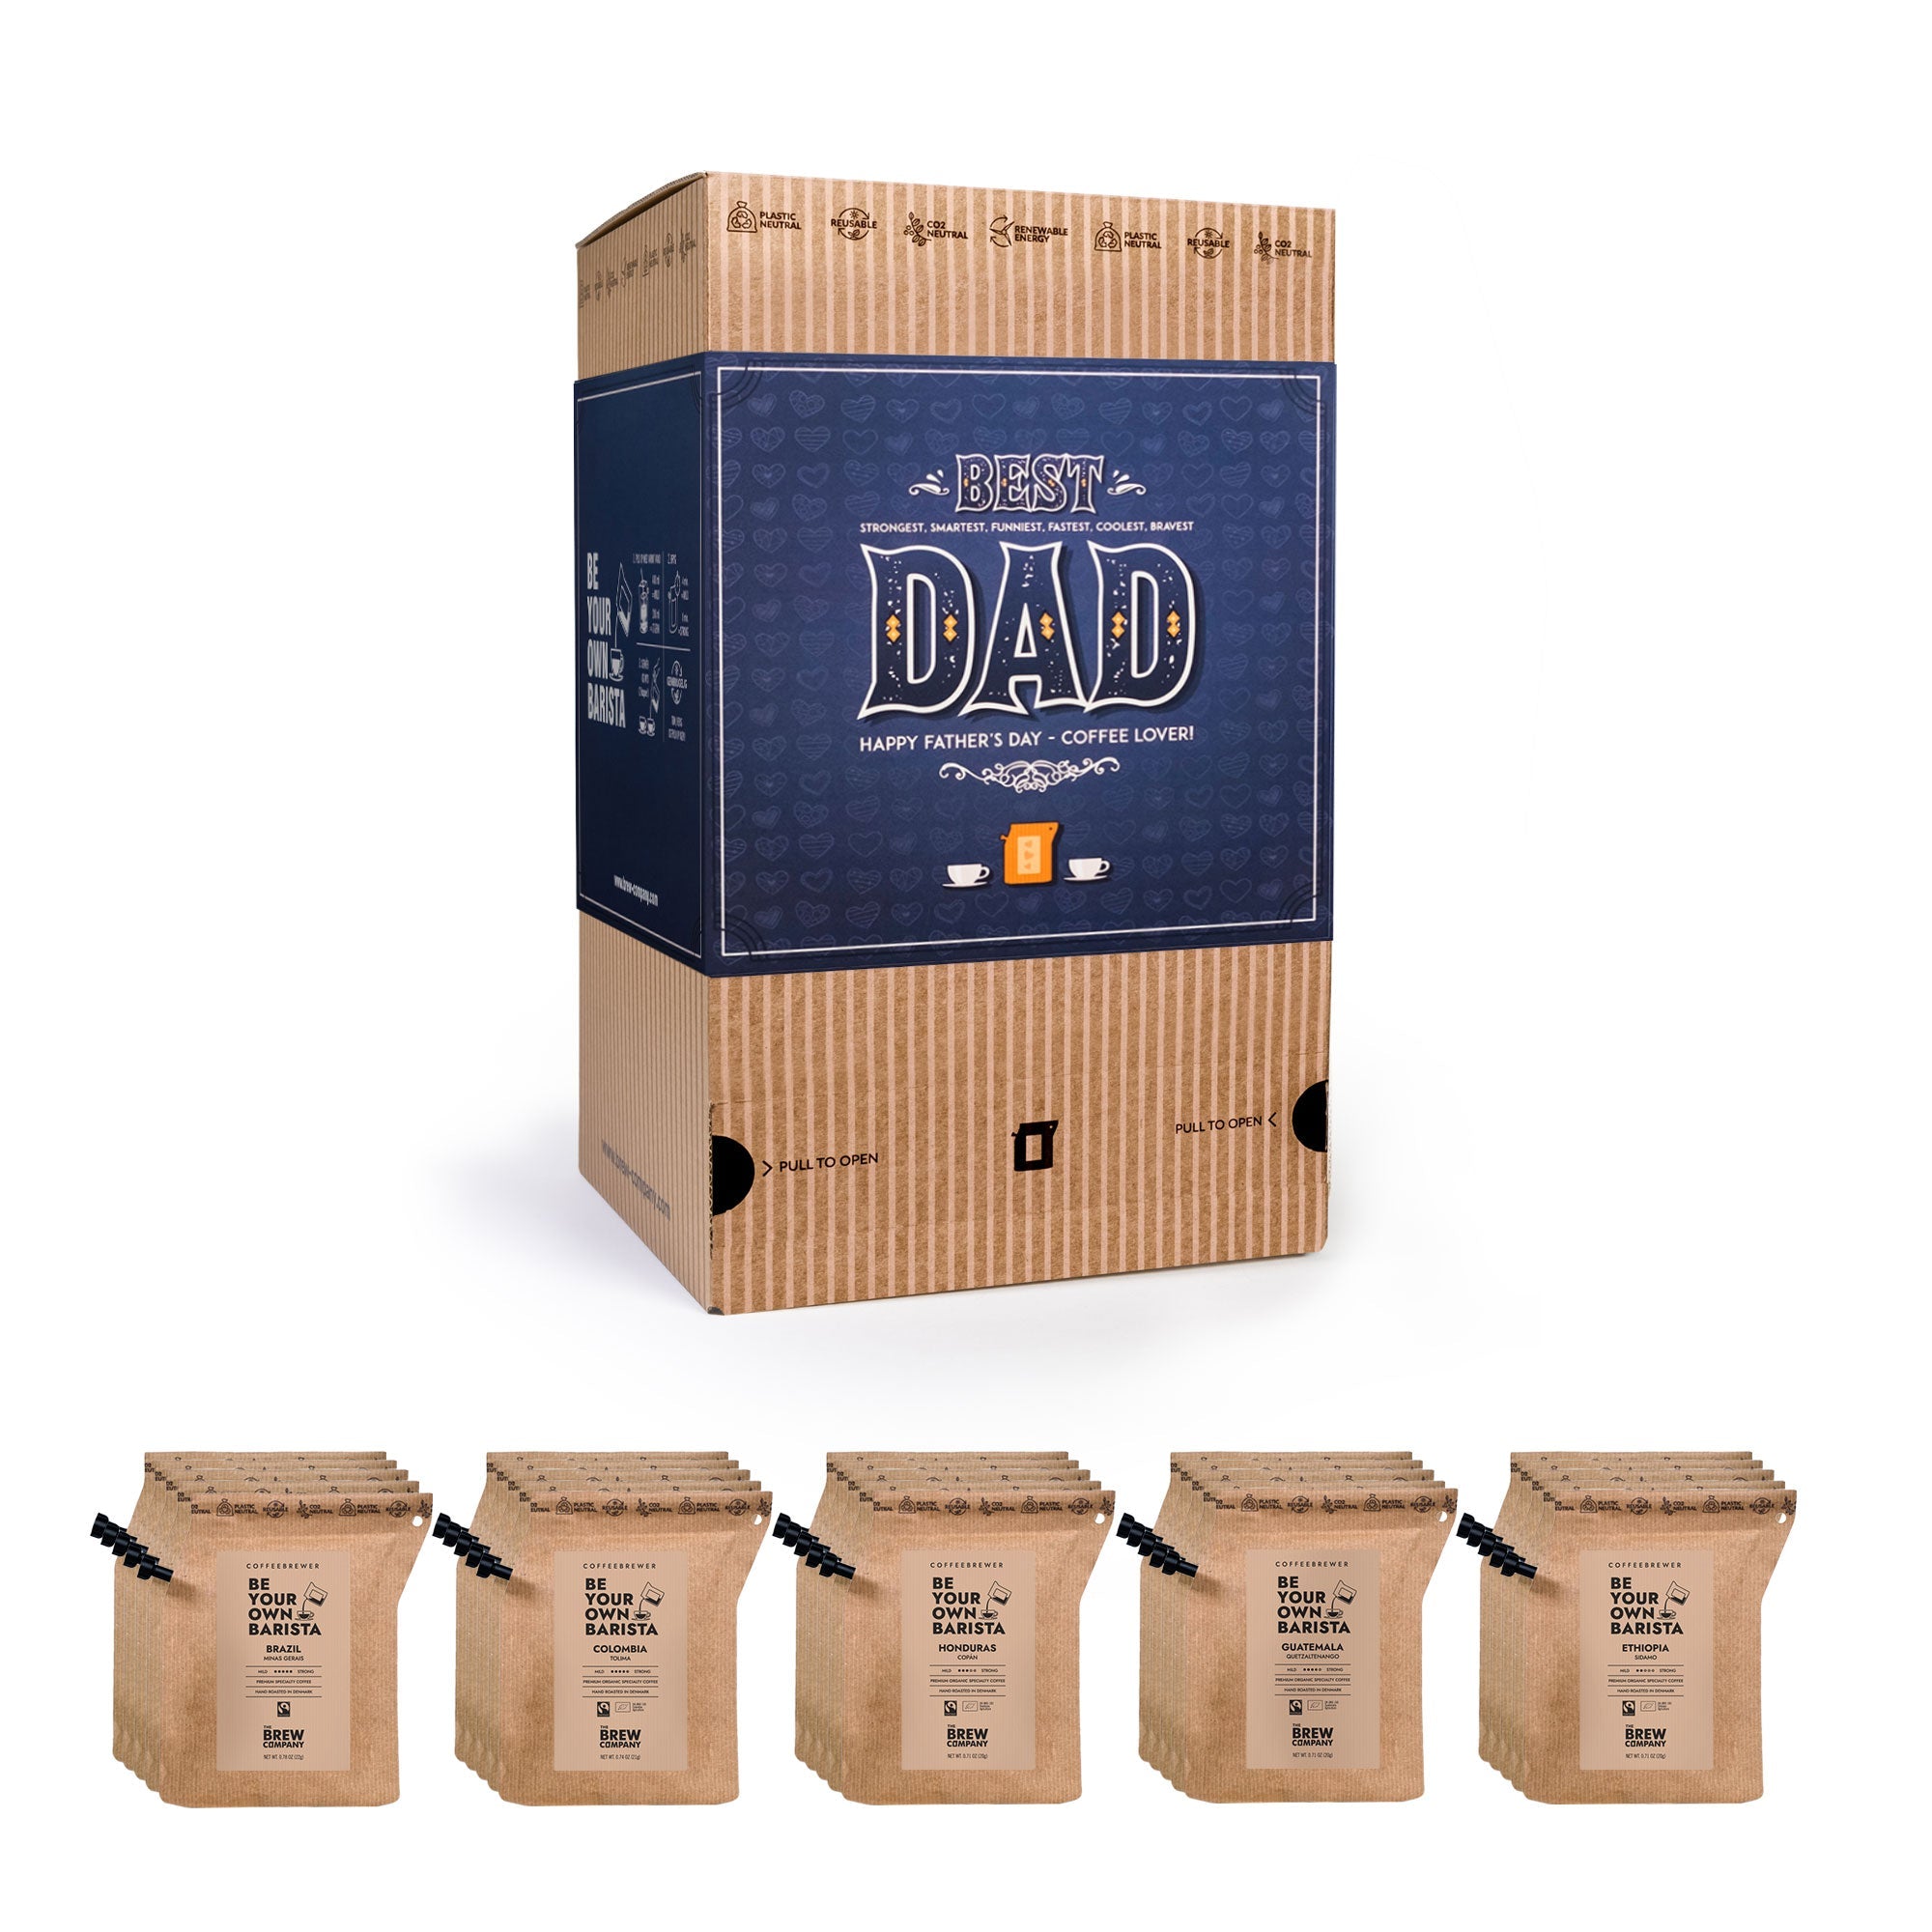 BEST DAD SPECIALTY COFFEE GIFT BOX 25 PCS